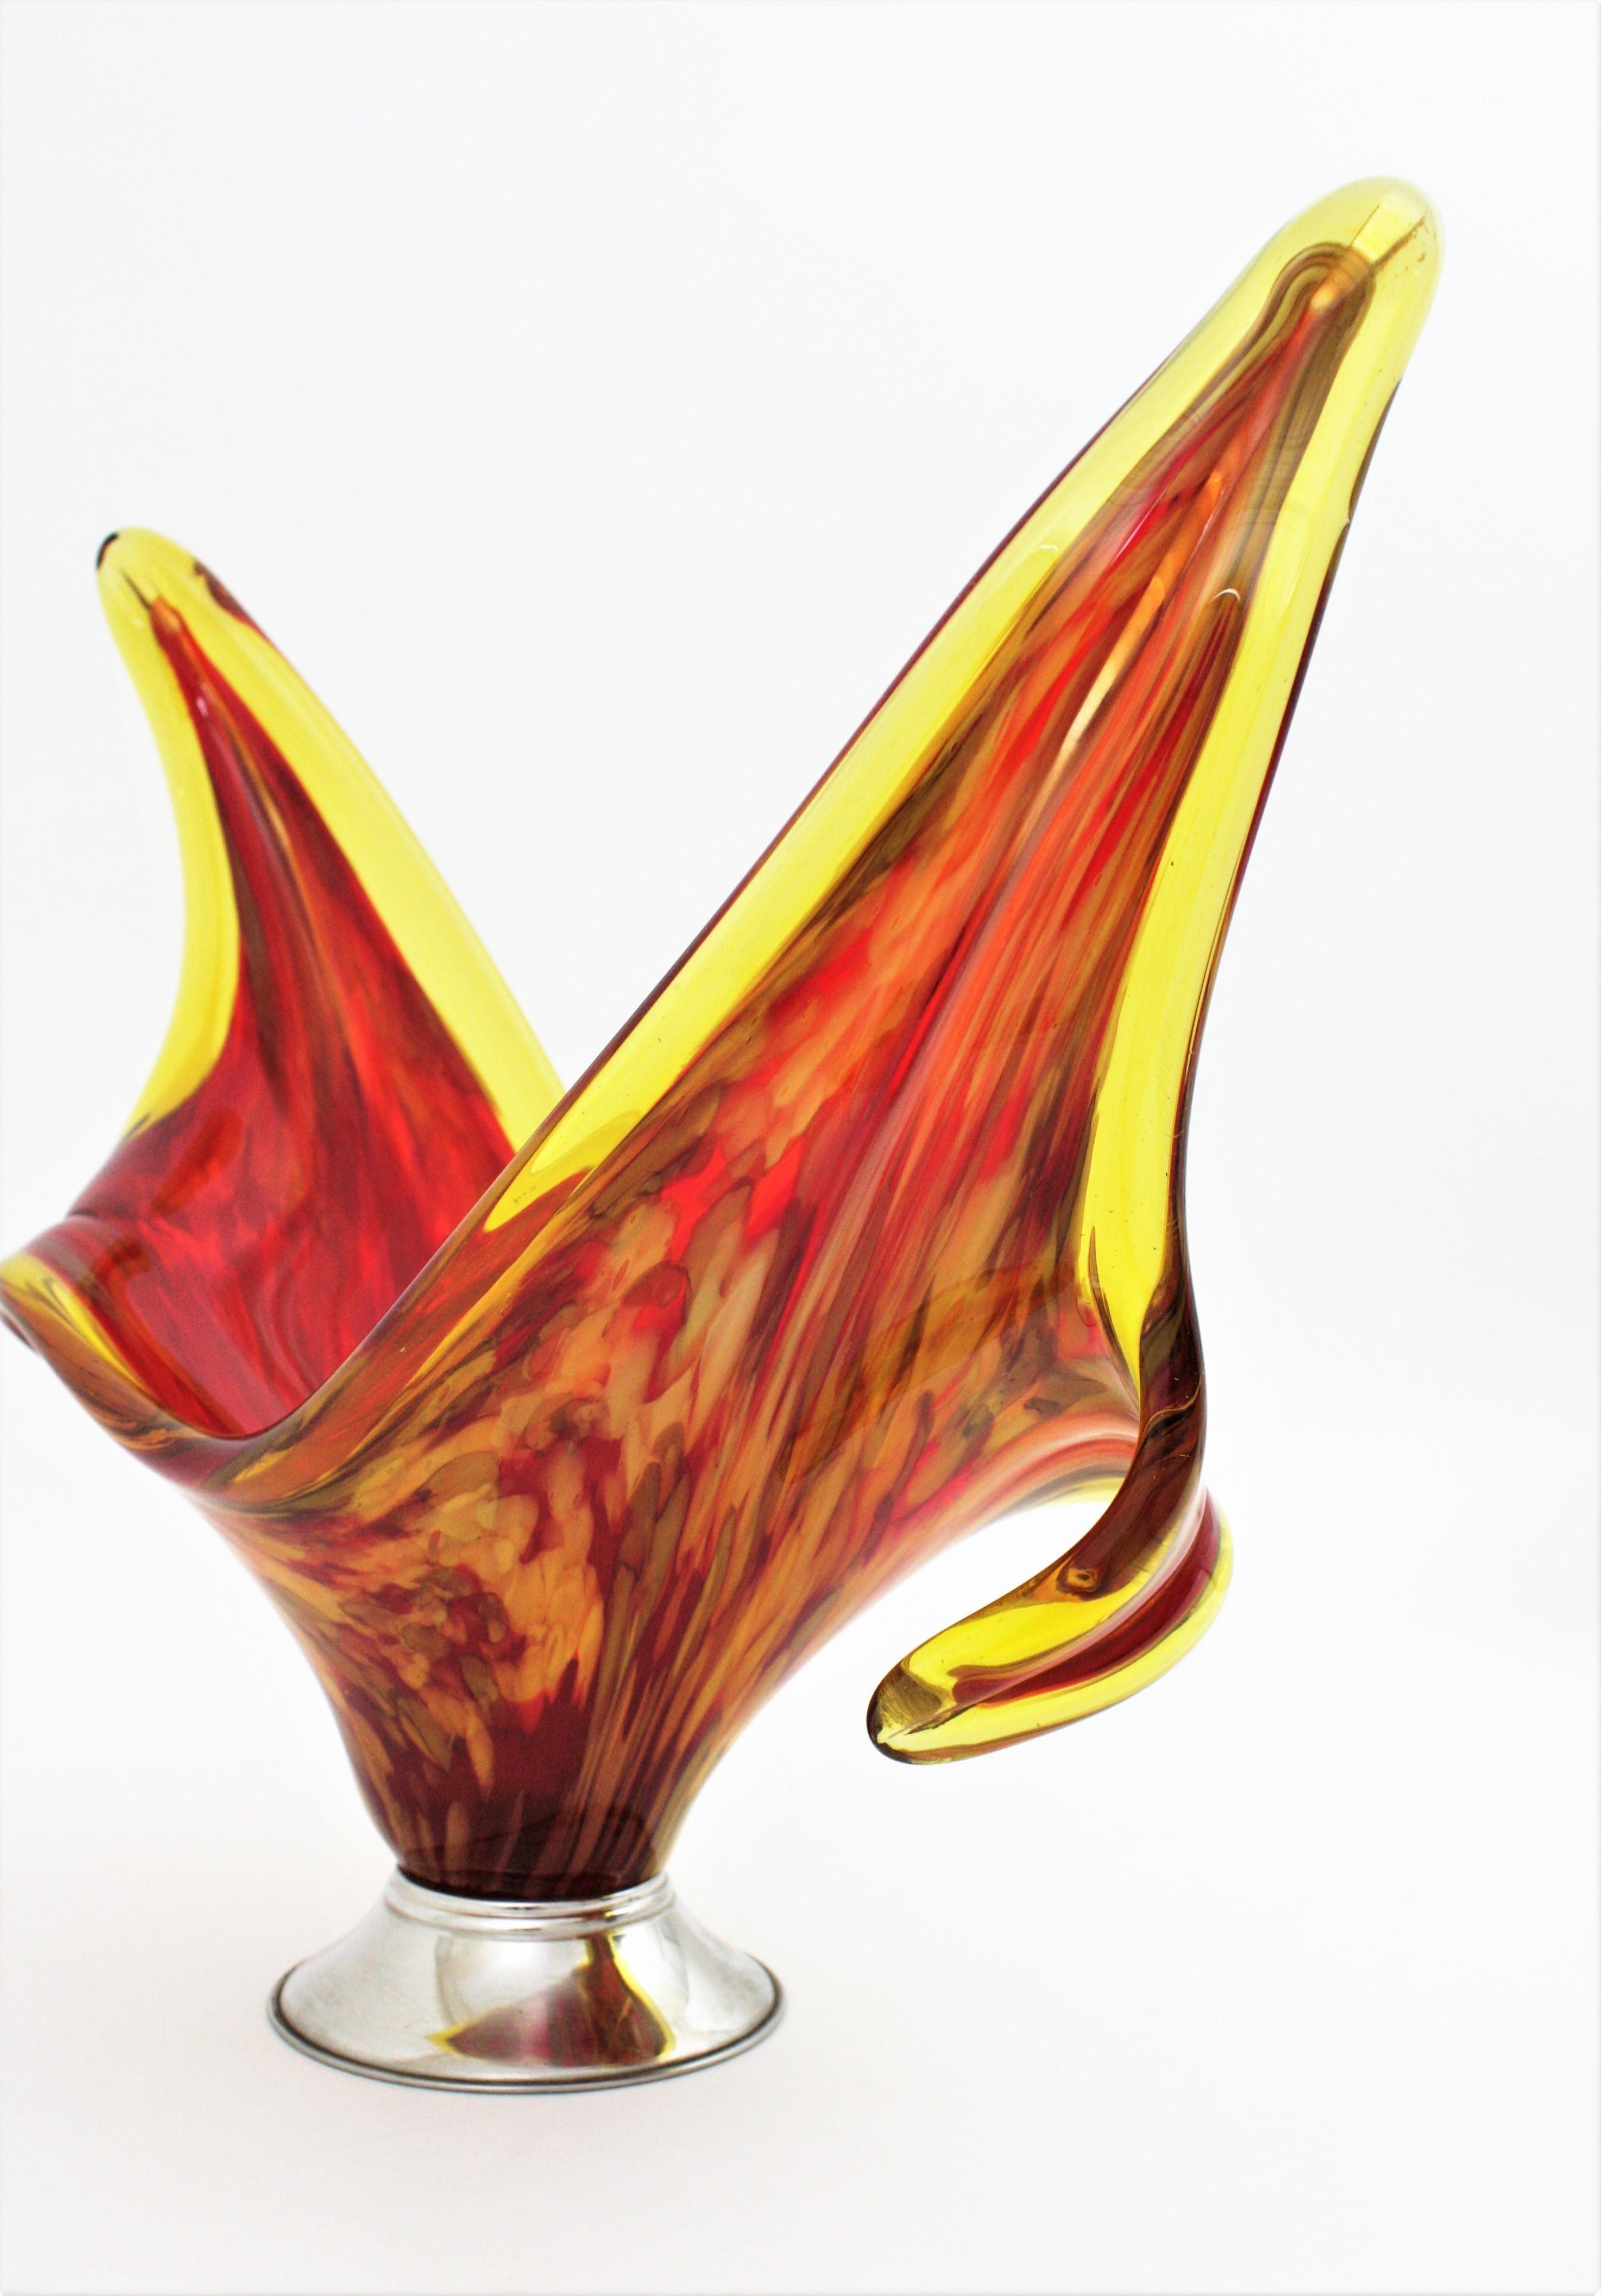 Italian Modernist Murano Red and Yellow Glass Centerpiece Vase with Chromed Base 1